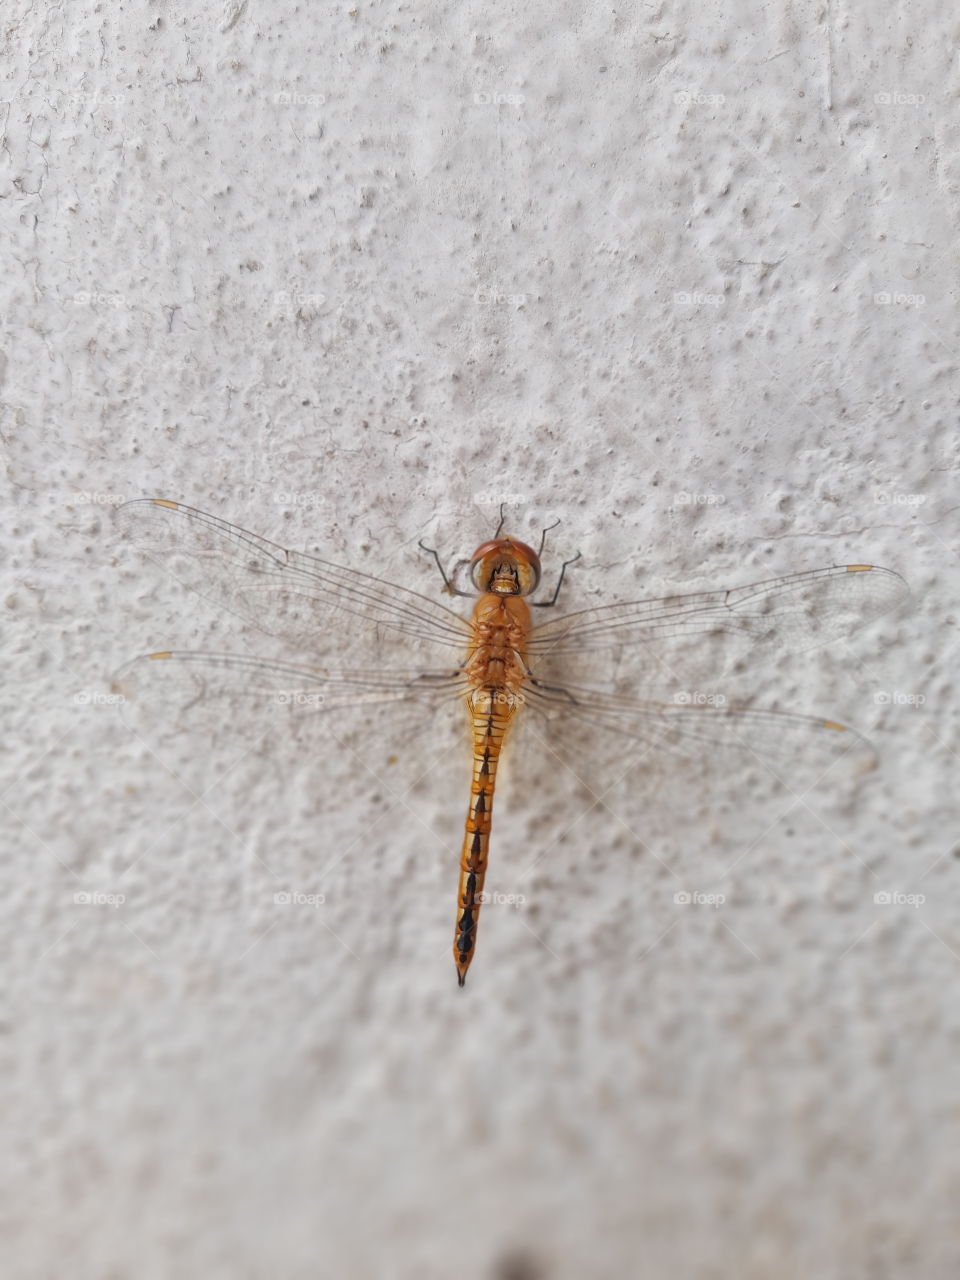 dragonfly is an insect belonging to the order odonata, infraorder Anisoptera.